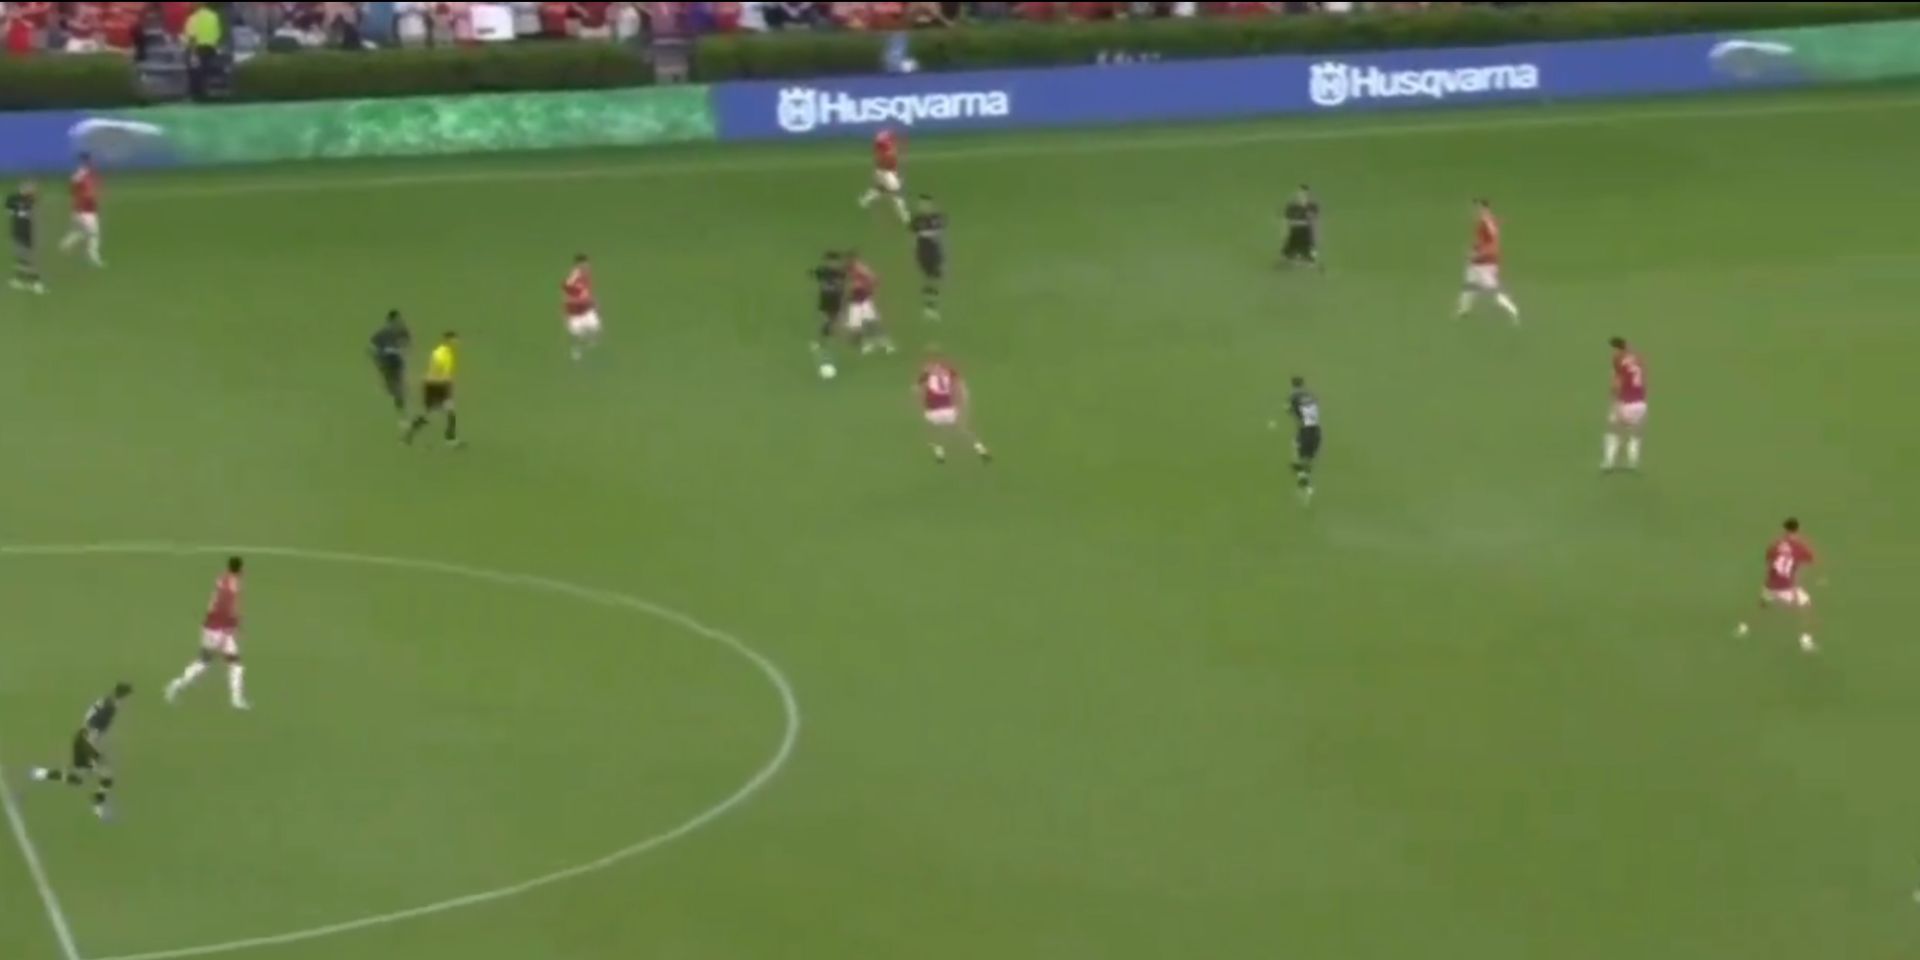 (Video) Carvalho’s highlights vs United show why he deserves a chance this season